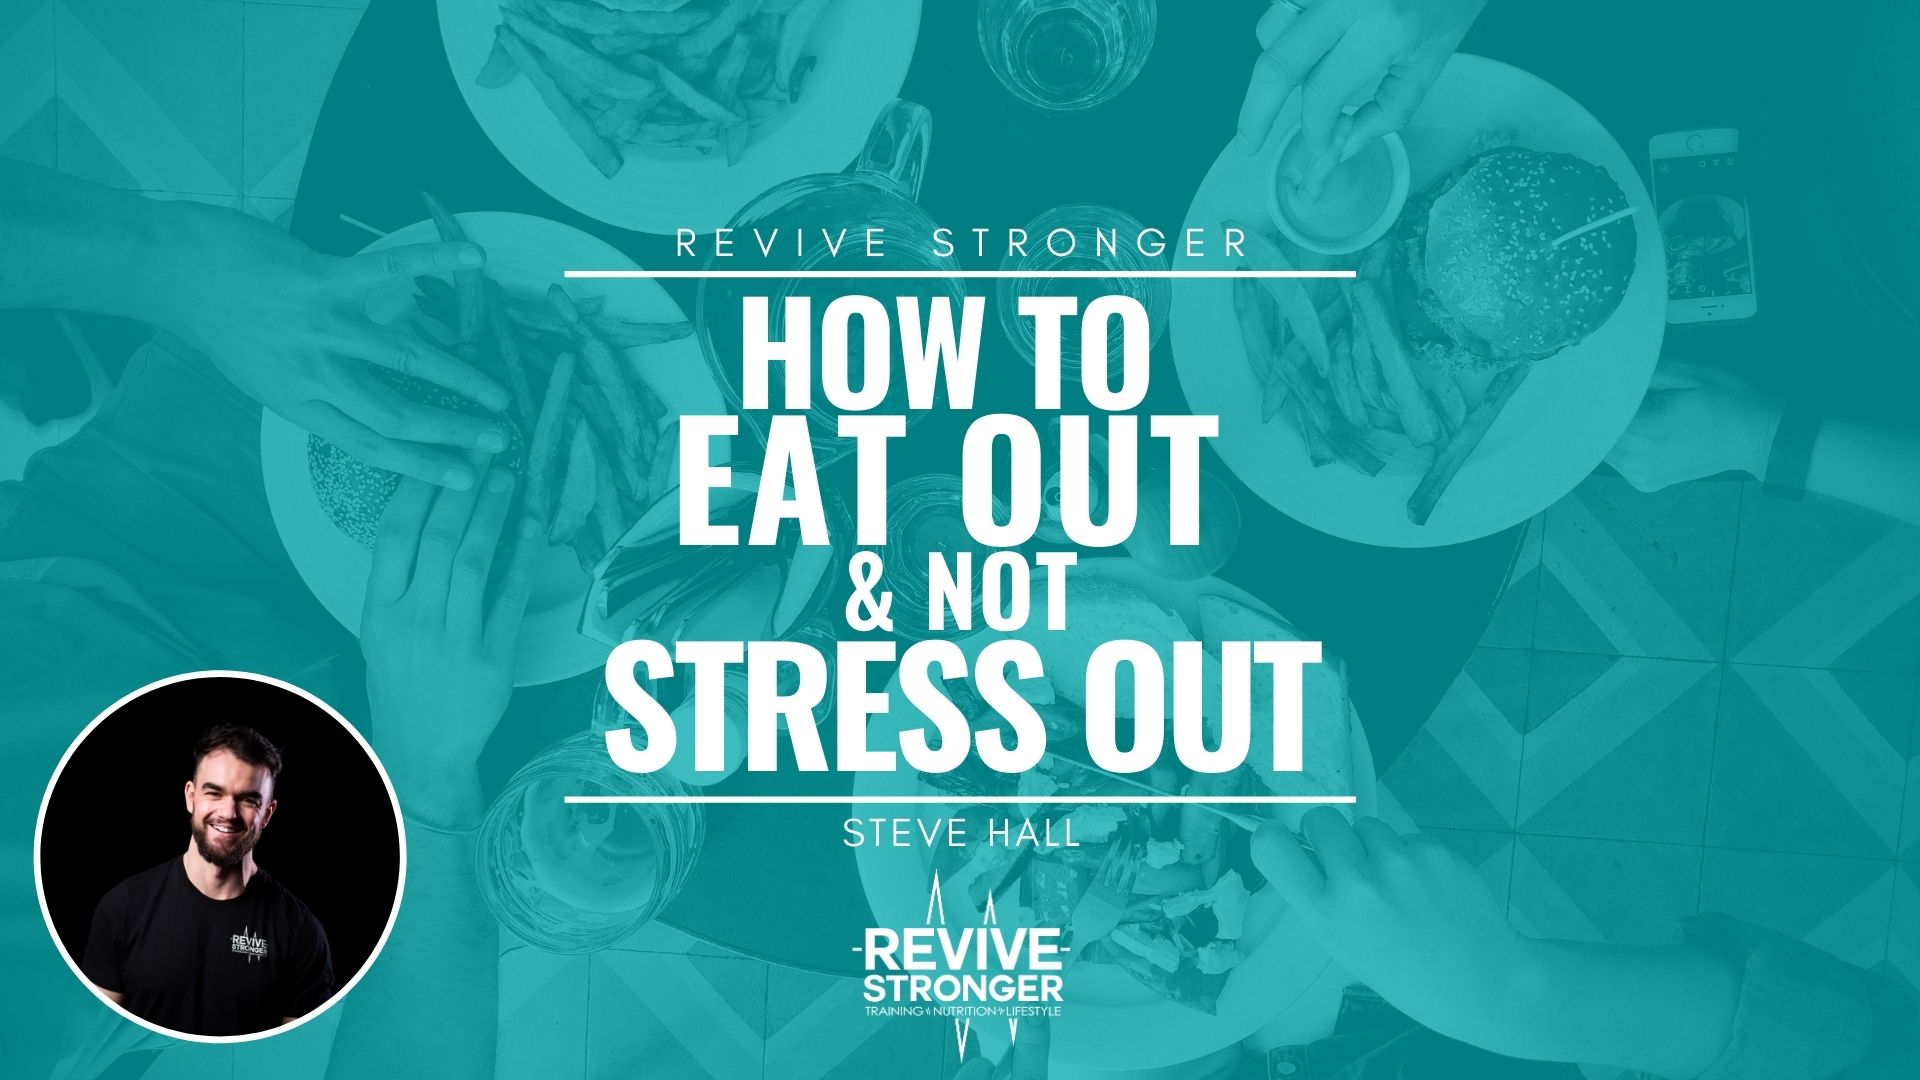 How To Eat Out & Not Stress Out - Steve Hall